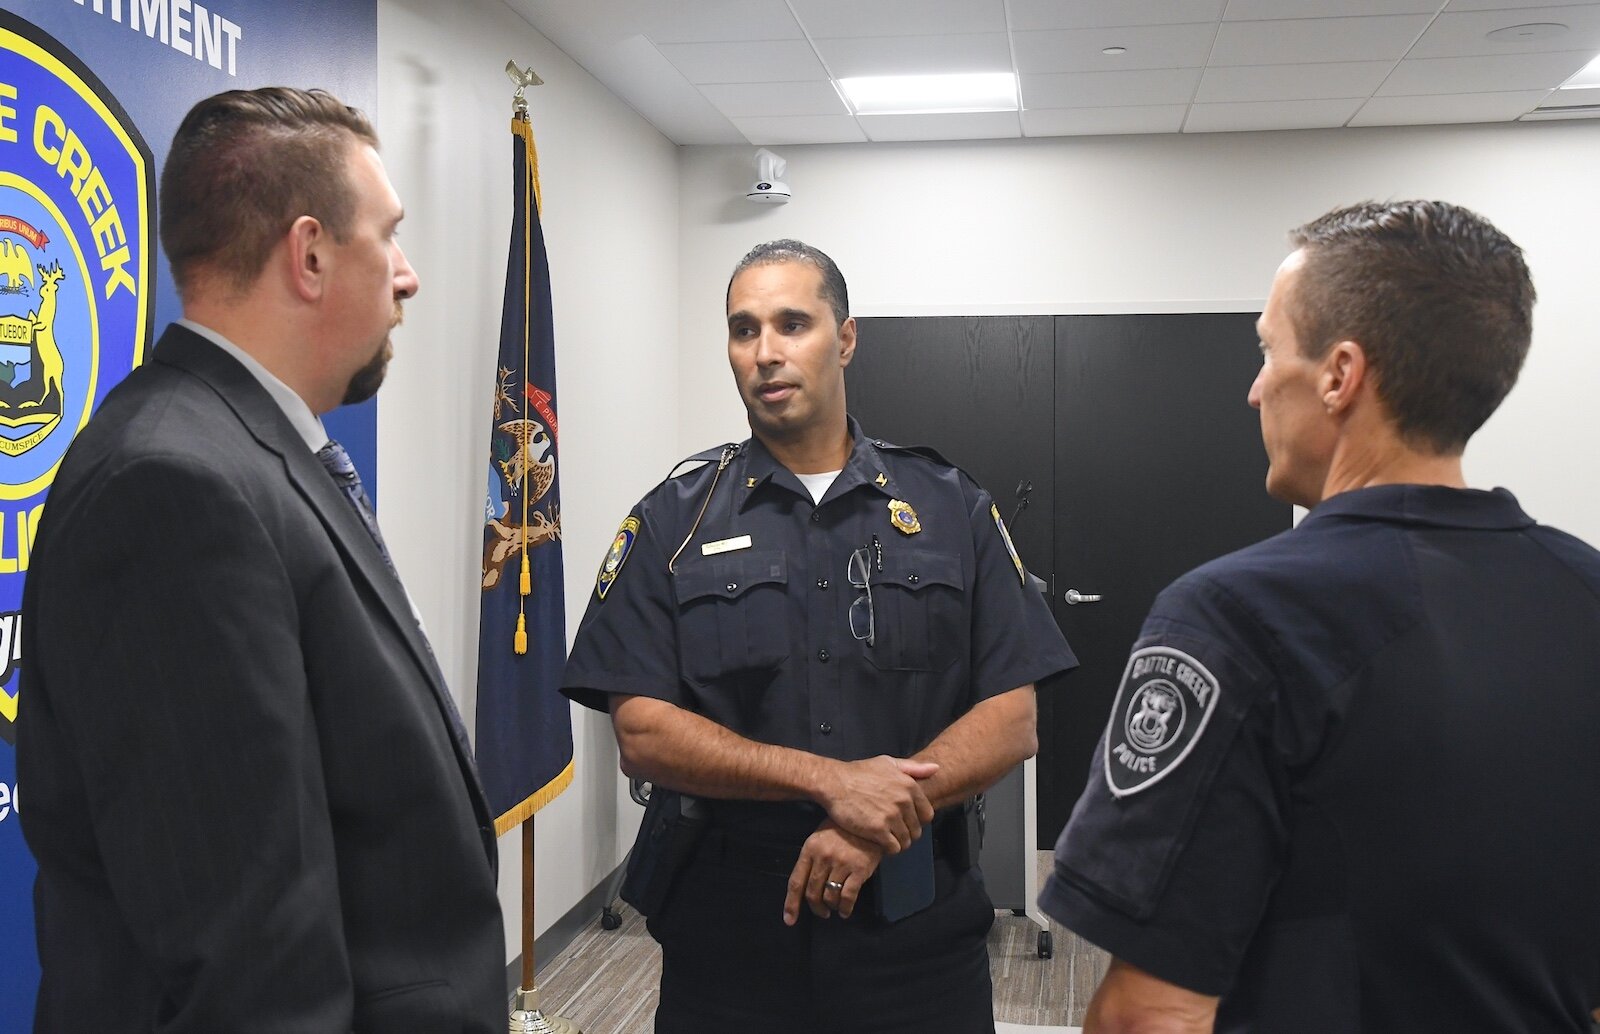 Battle Creek Police Chief Shannon Bagley, center, talks with Lt. Ryan Strunk, left, and Deputy Chief Doug Bagwell.